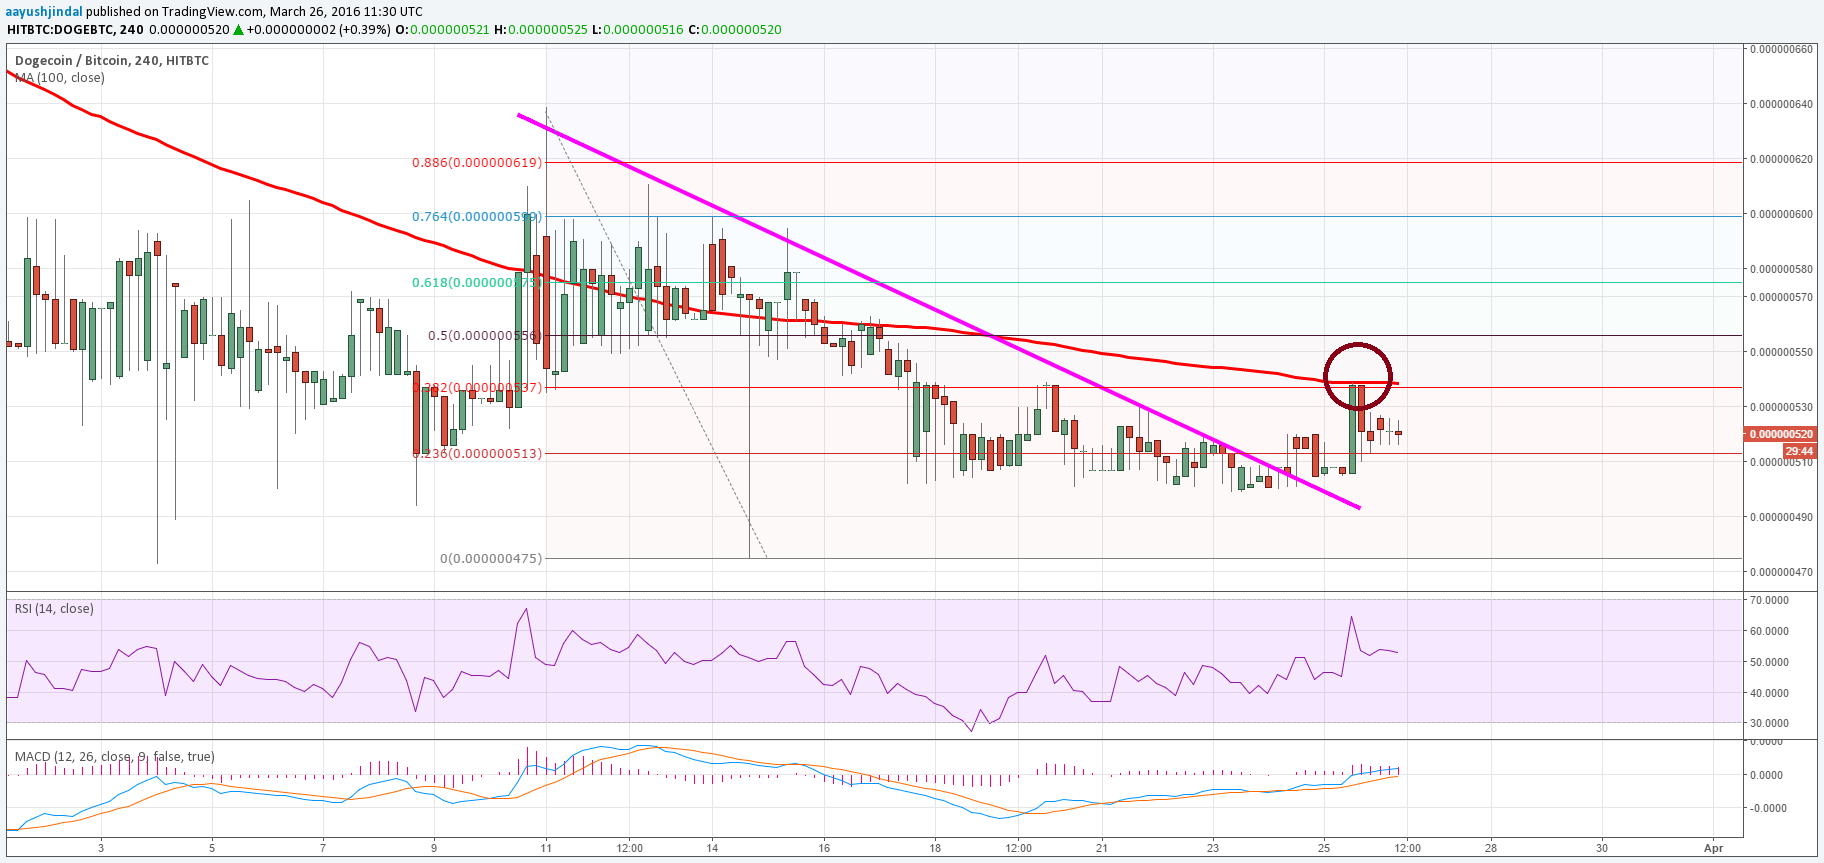 Dogecoin Price Weekly Analysis